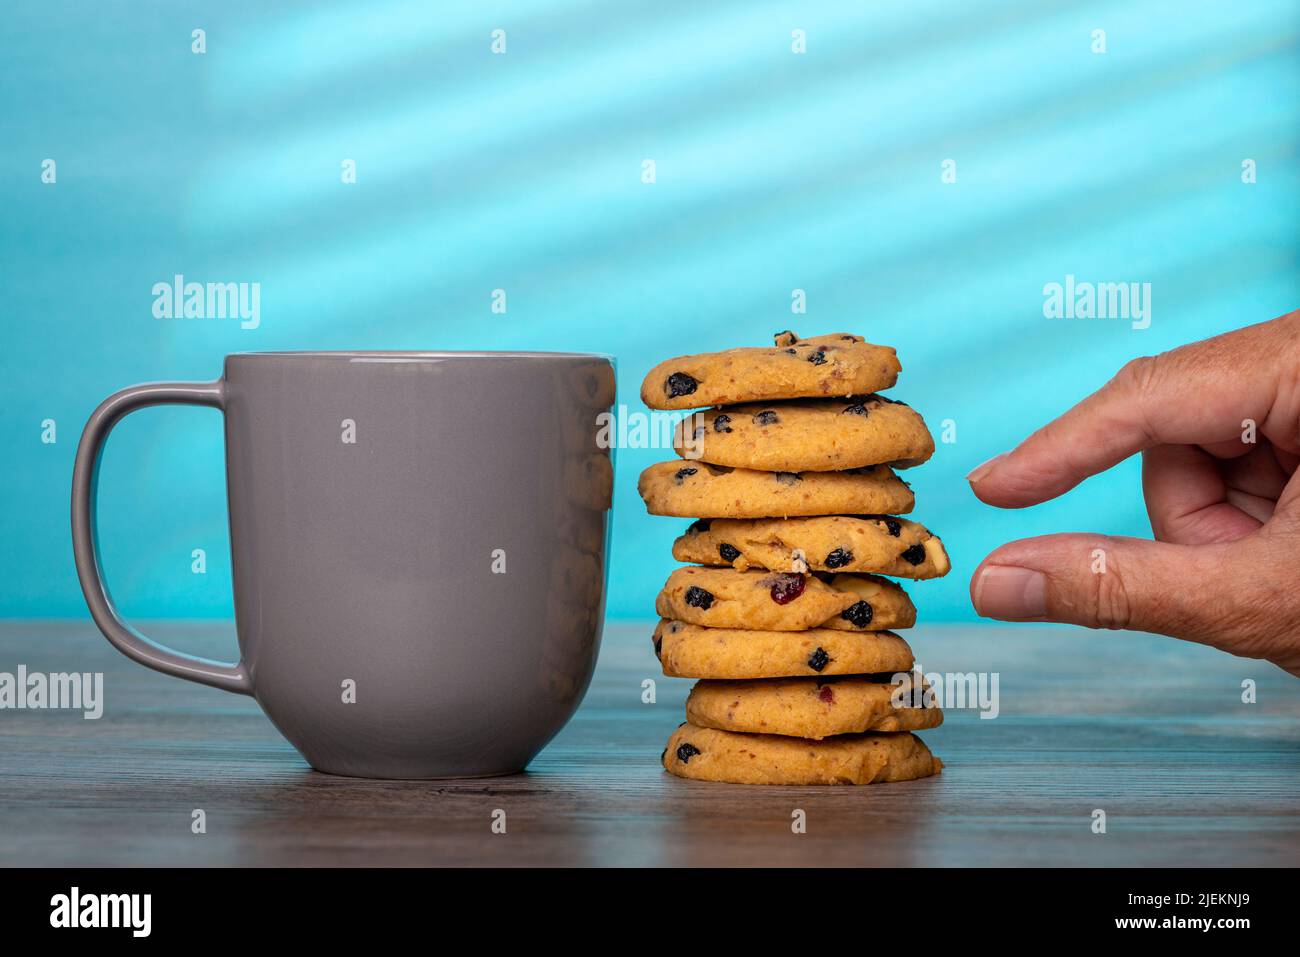 stack of home cooked cookies and a grey mug against a blue background with a hand taking a cookie. Stock Photo